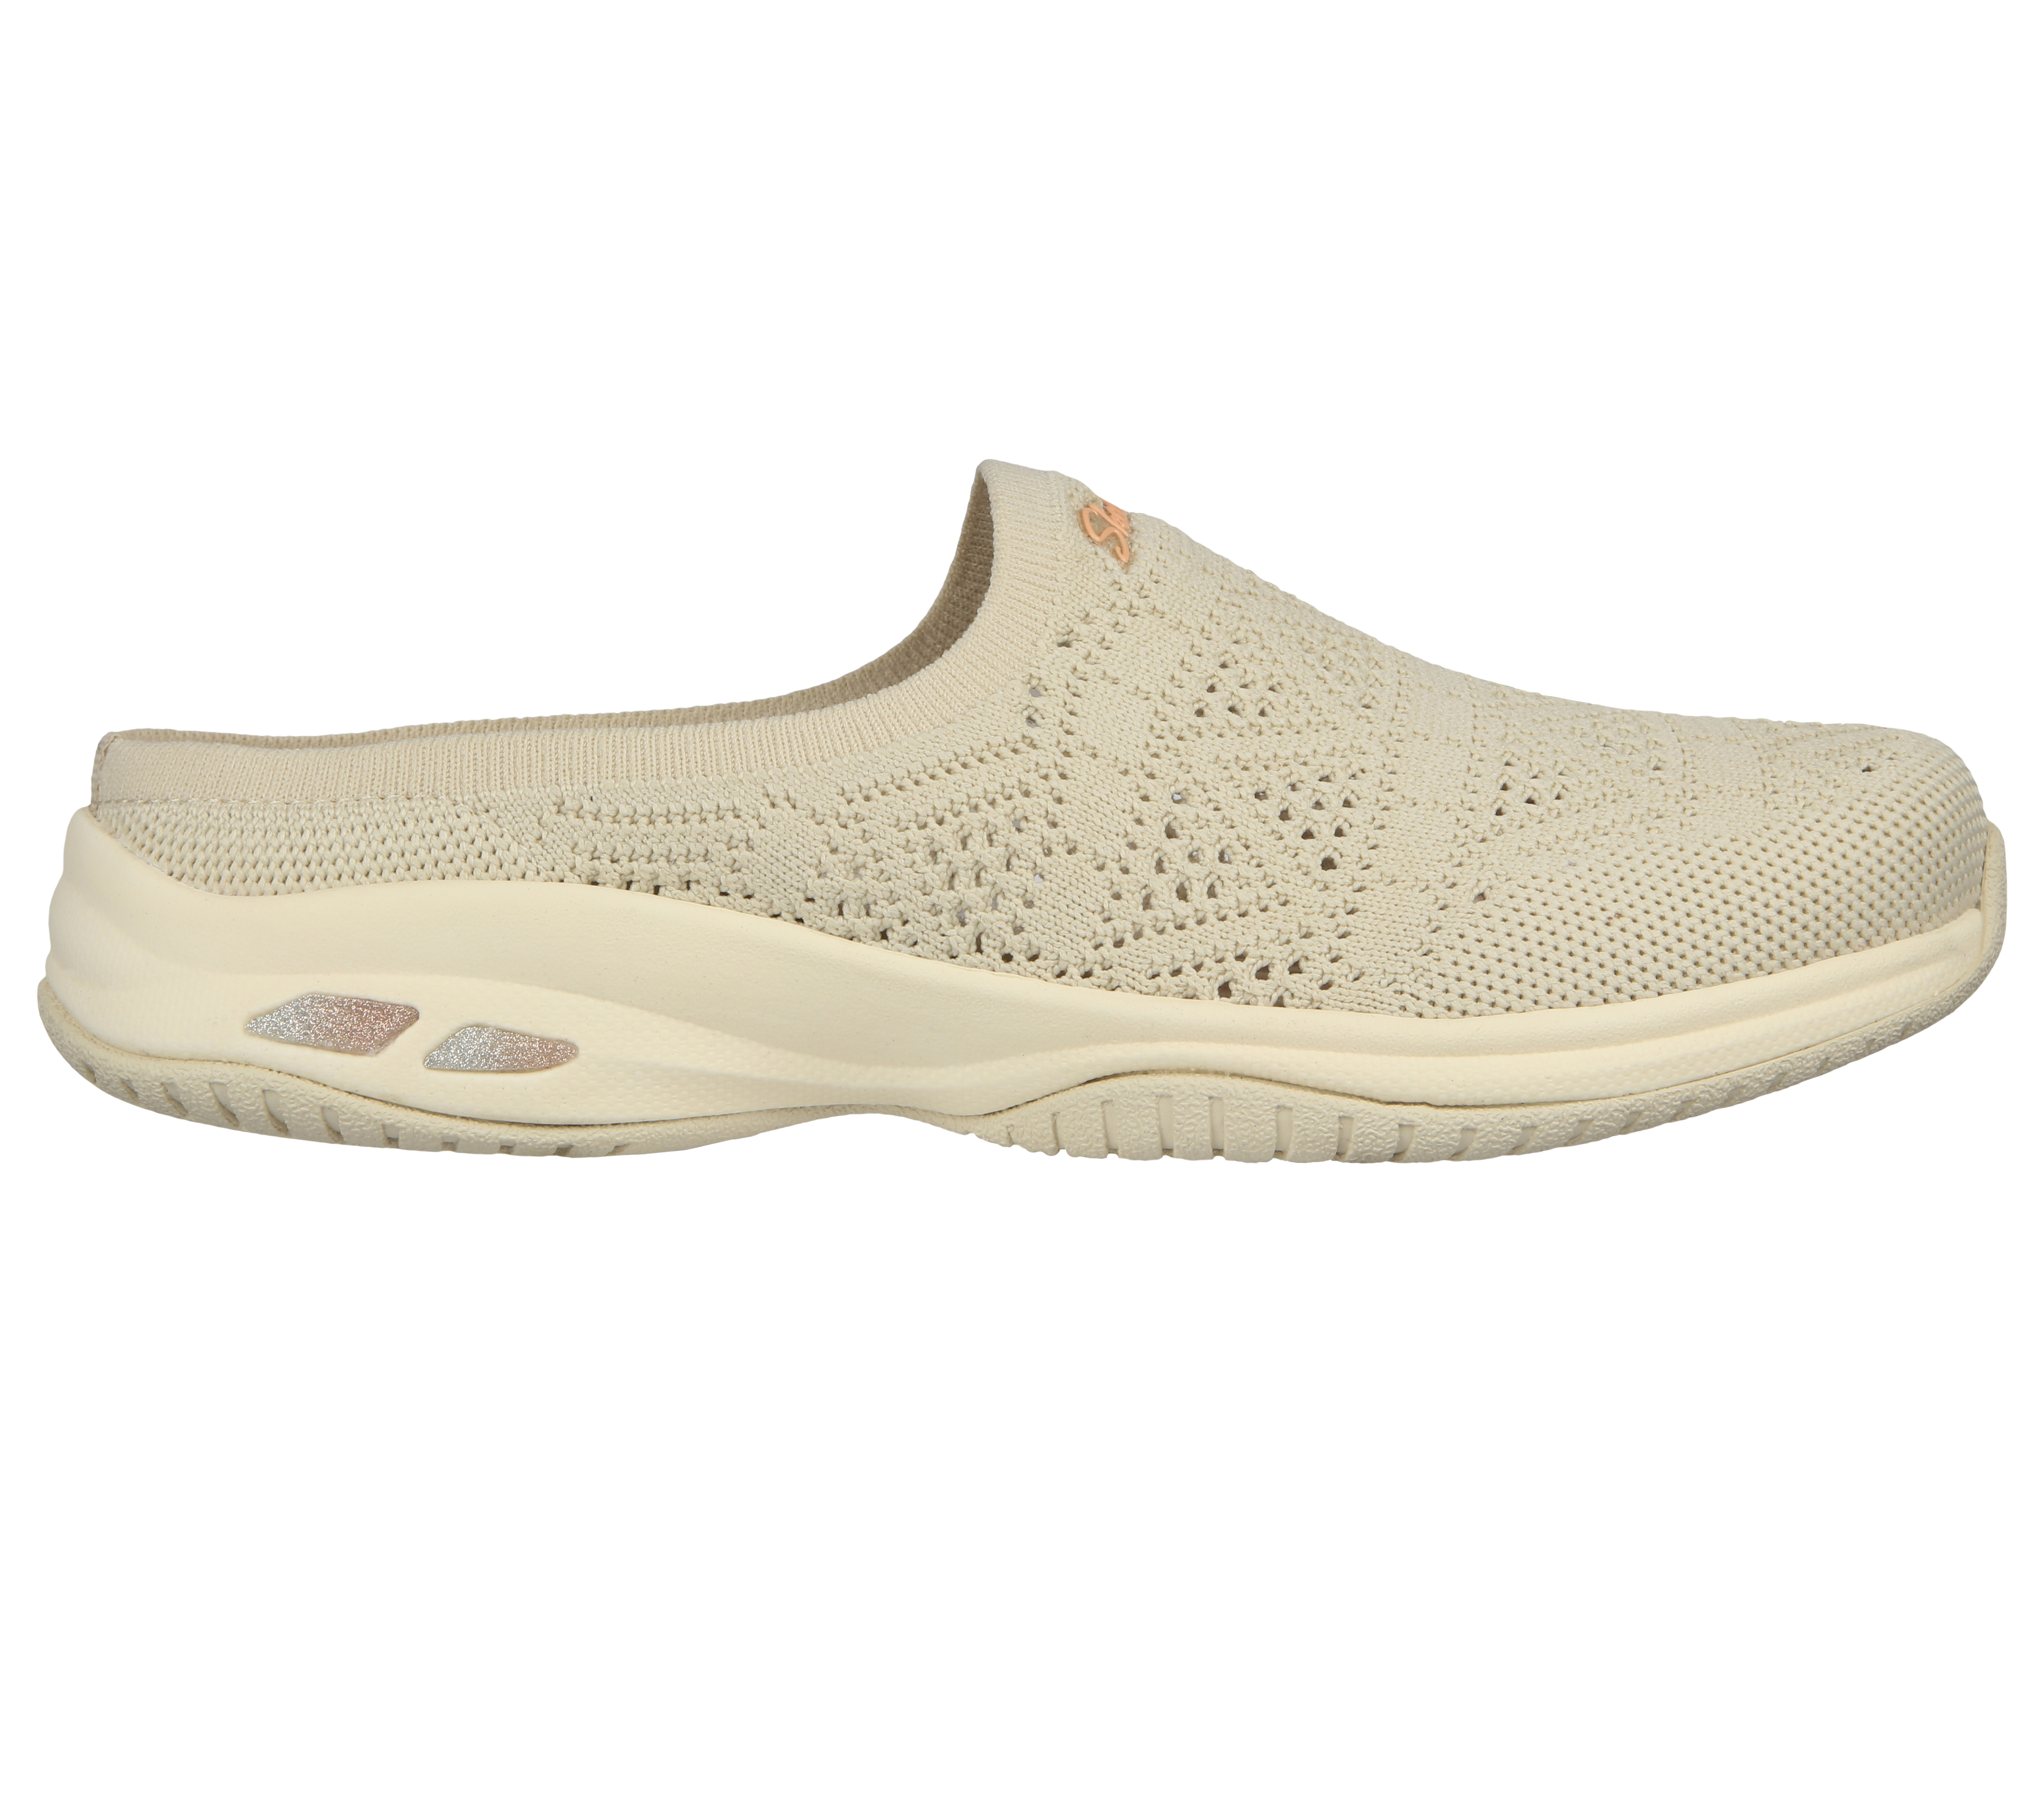 Shop the Relaxed Fit: Commute Time - In The Clear | SKECHERS CA